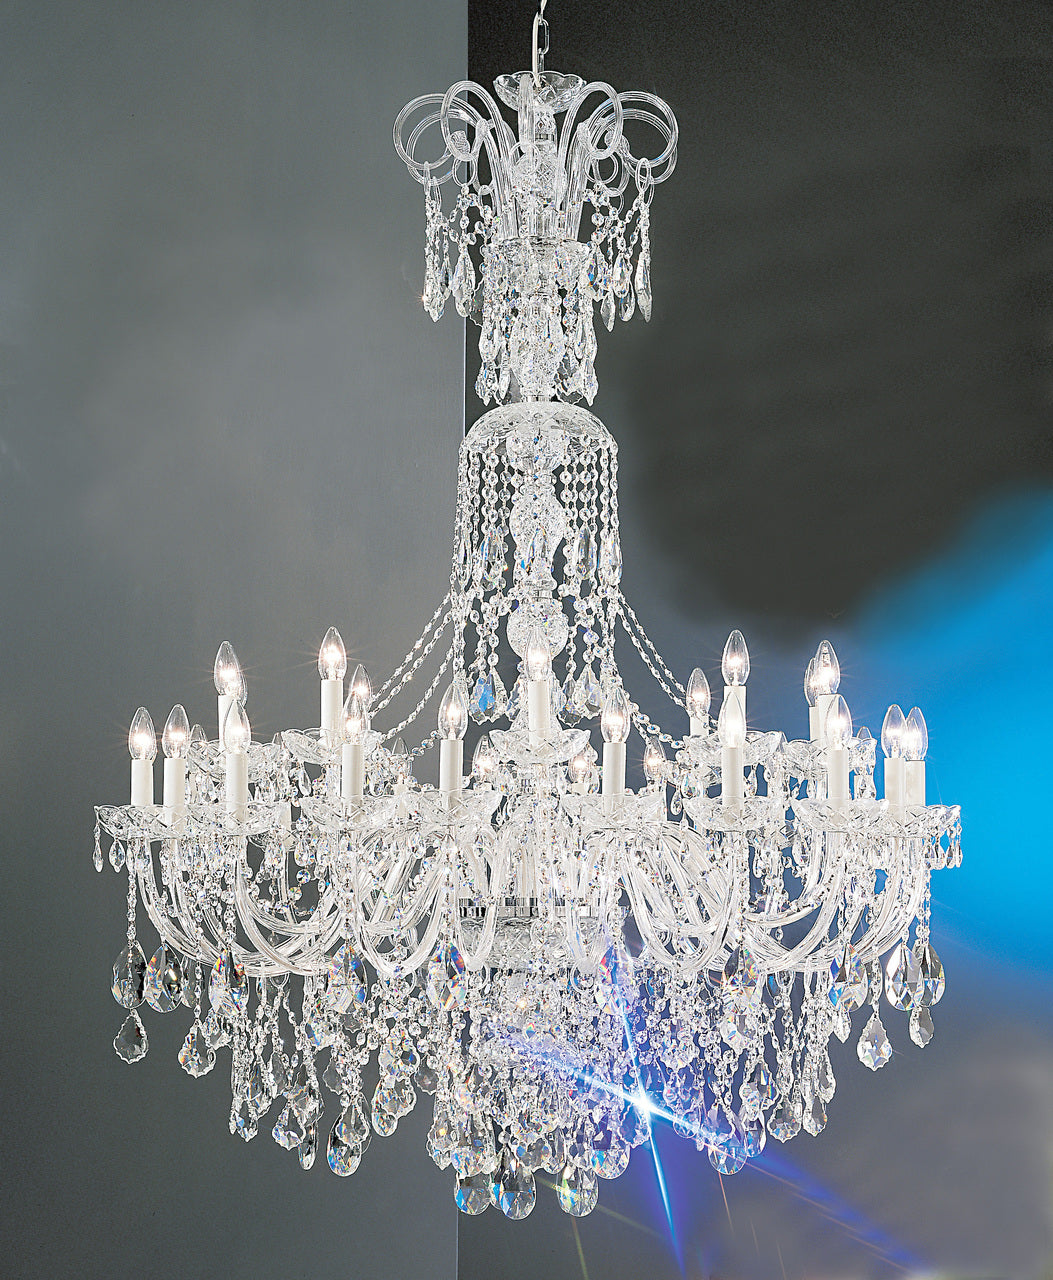 Classic Lighting 8264 CH S Bohemia Crystal/Glass Chandelier in Chrome (Imported from Italy)